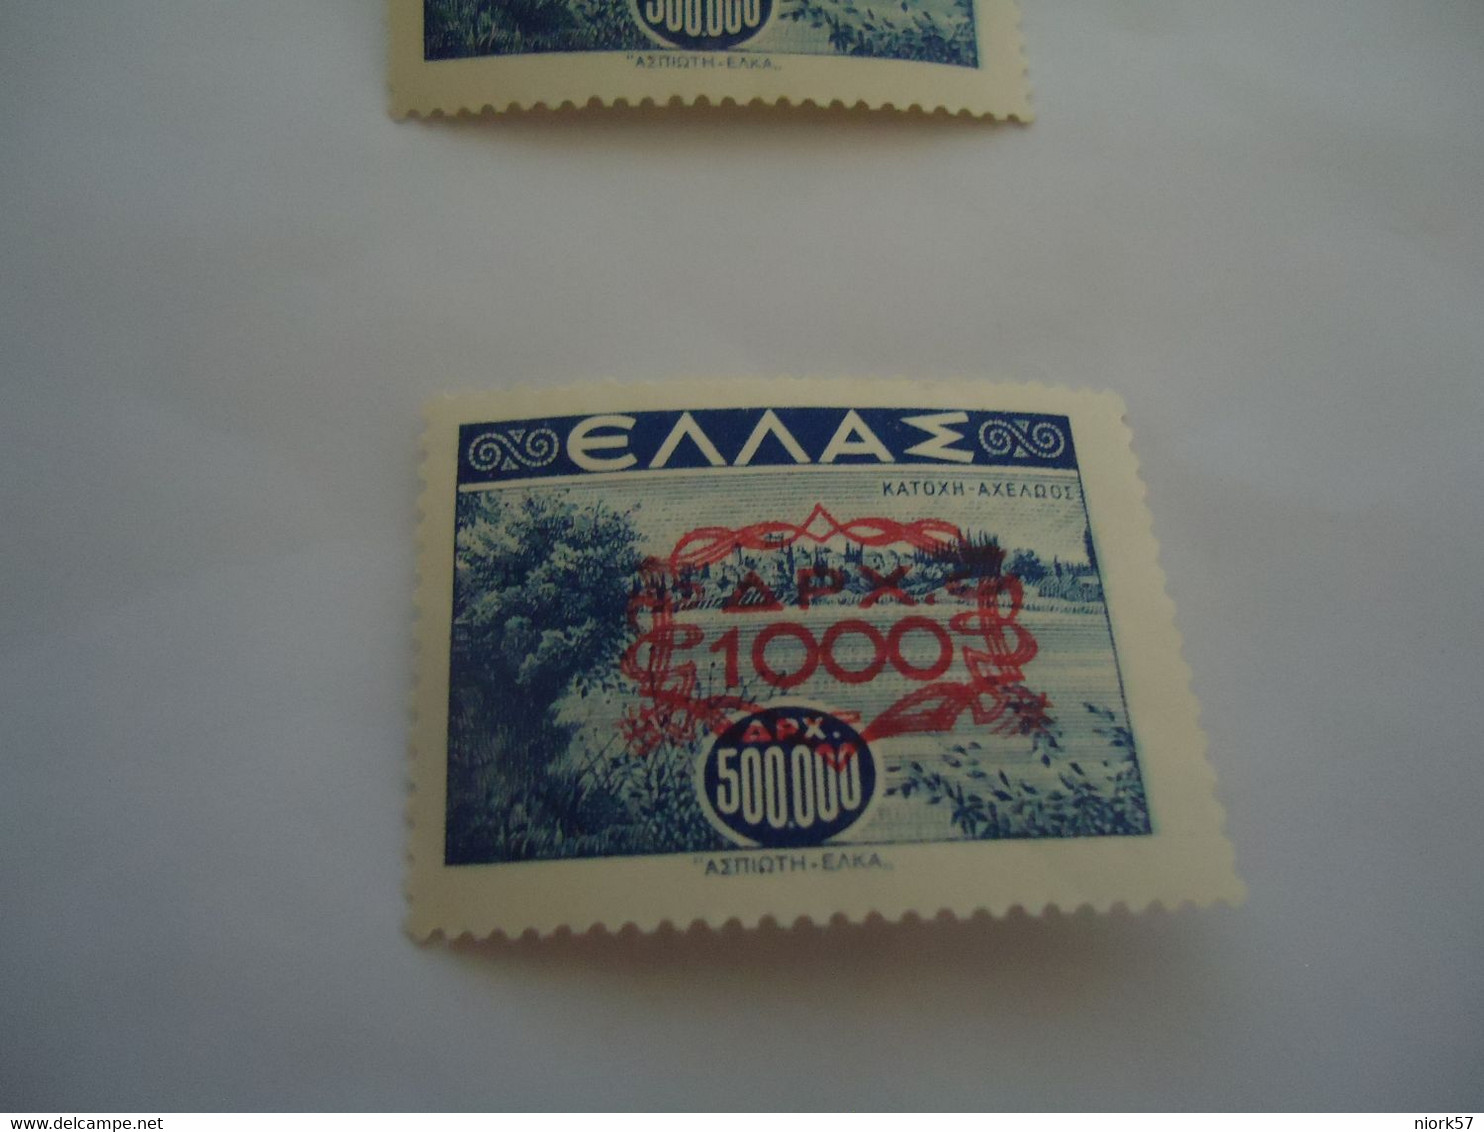 GREECE  MNH STAMPS  LANDSCAPES  CHAINS SURCHARGES  1000/500000 - Epirus & Albanie